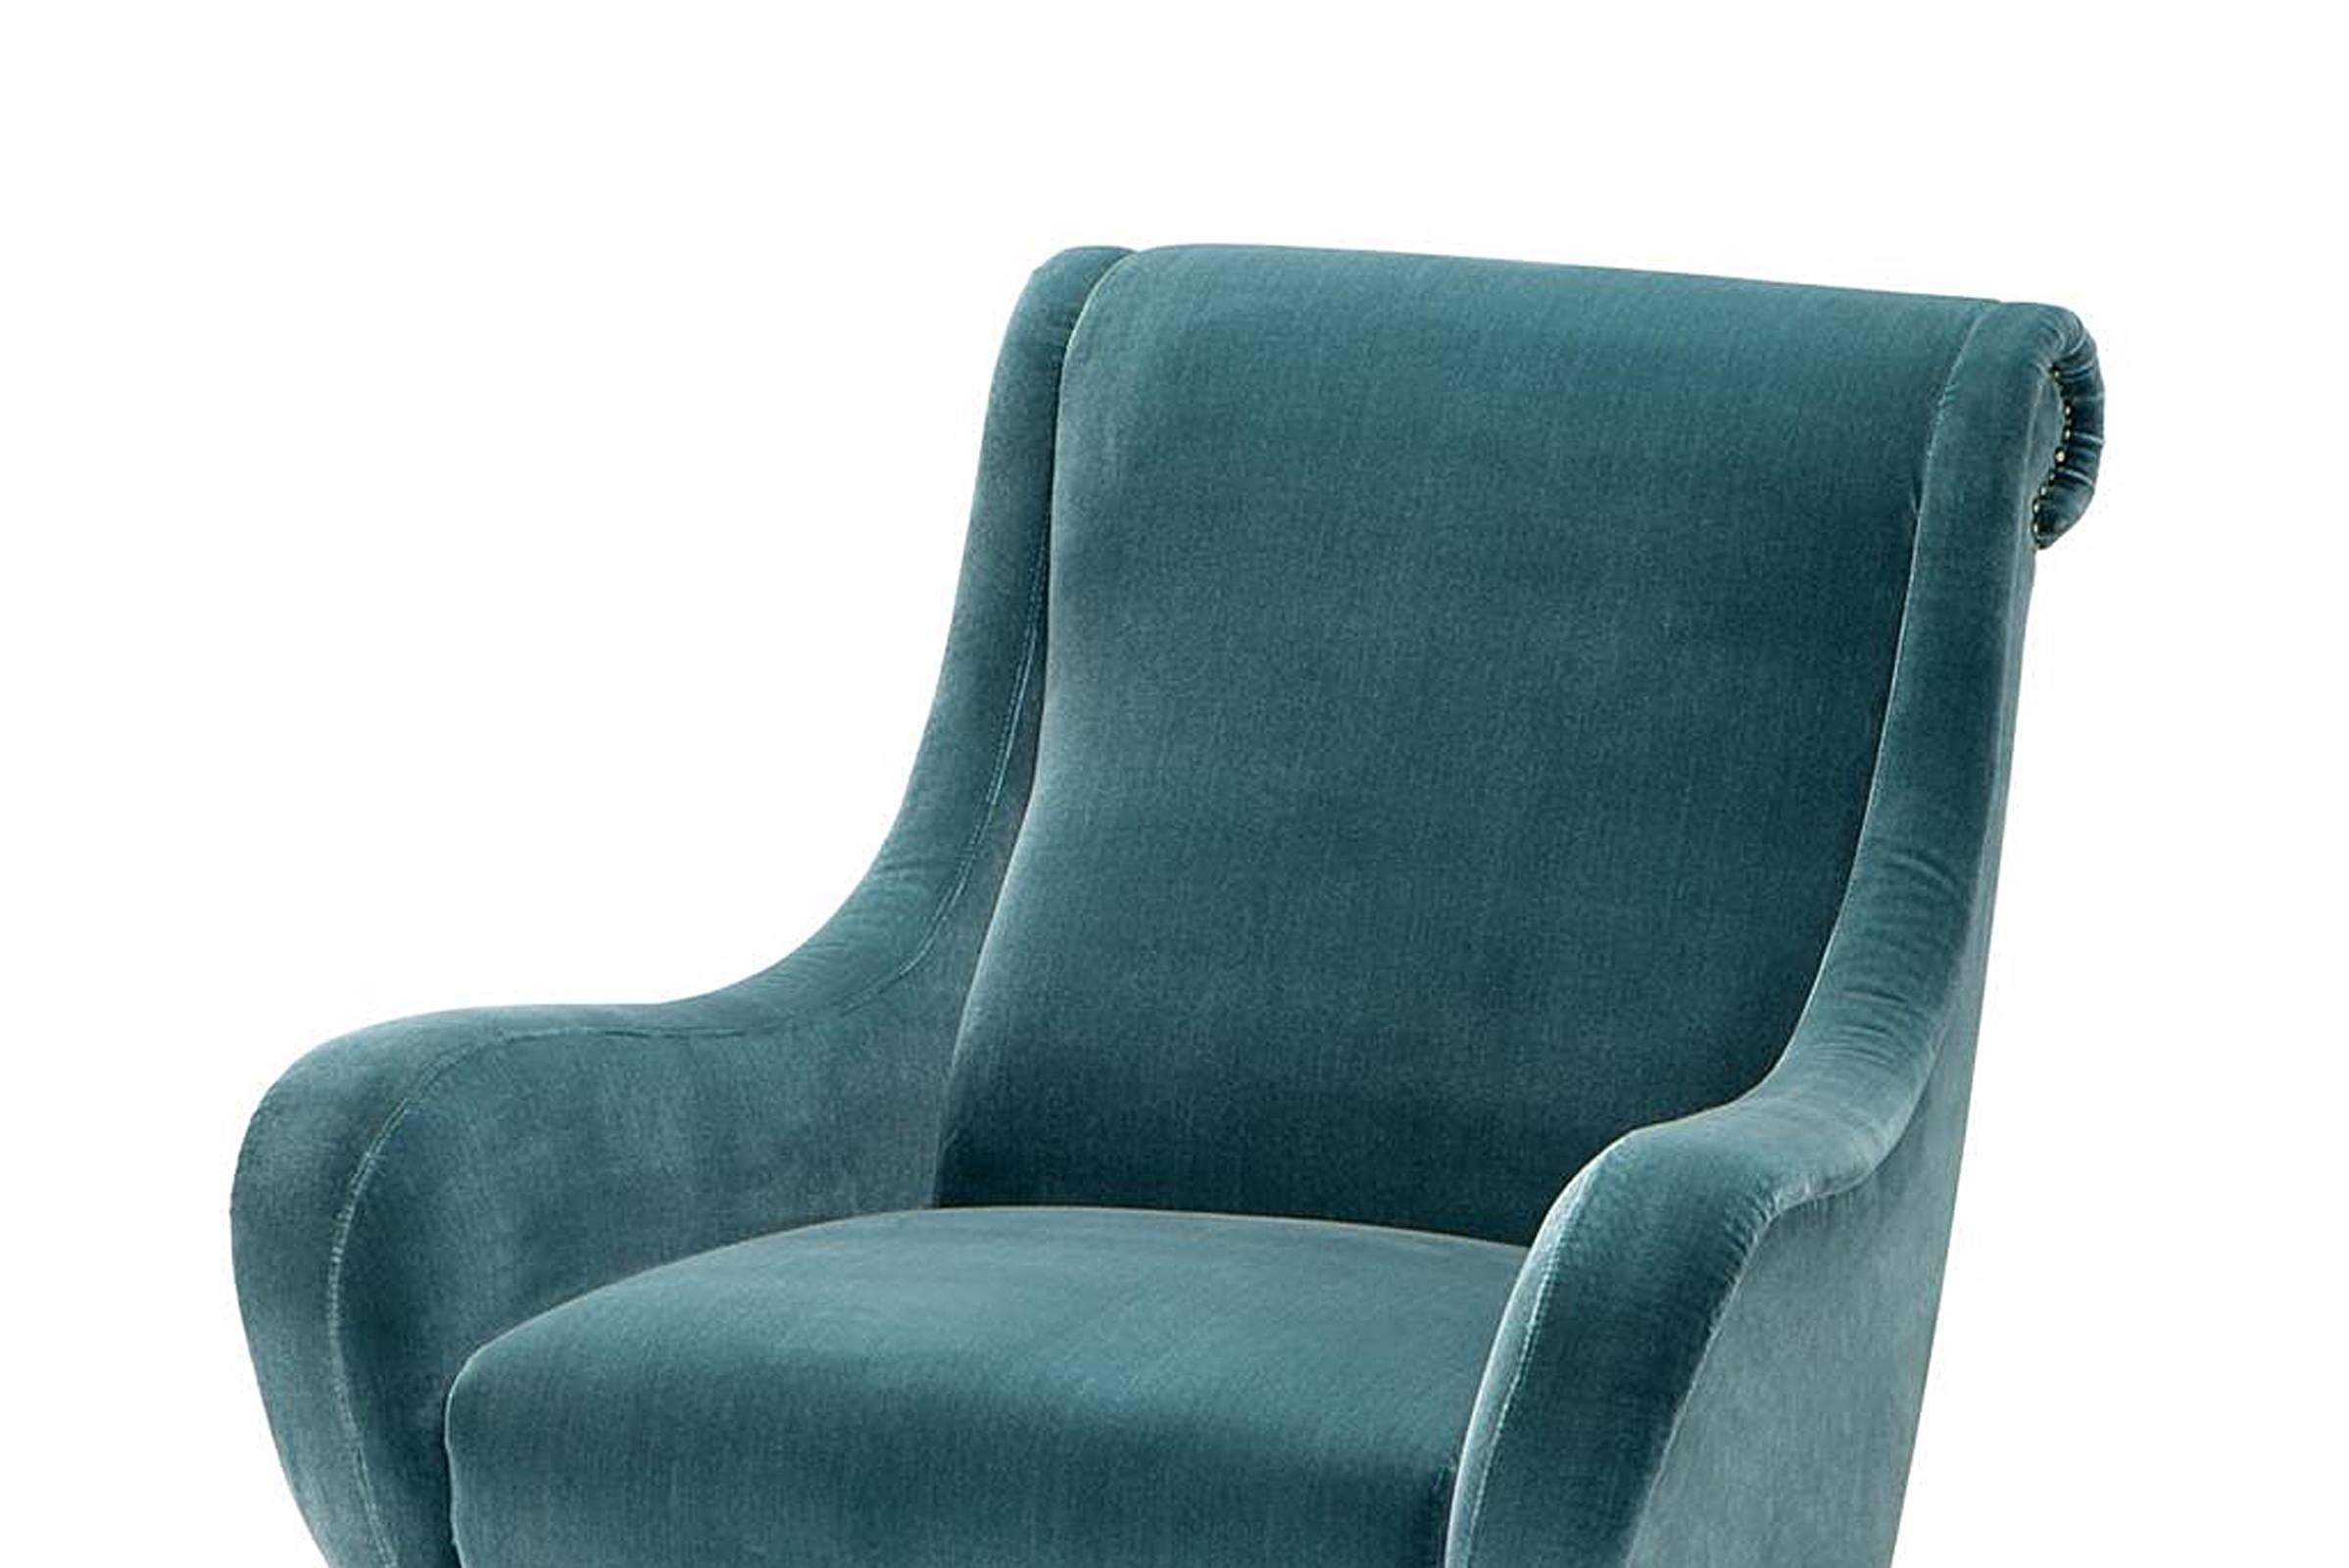 Armchair Santiago with velvet fabric deep
turquoise finish. Black brass legs and antique
brass nails. Available in velvet fabric black finish.
 

